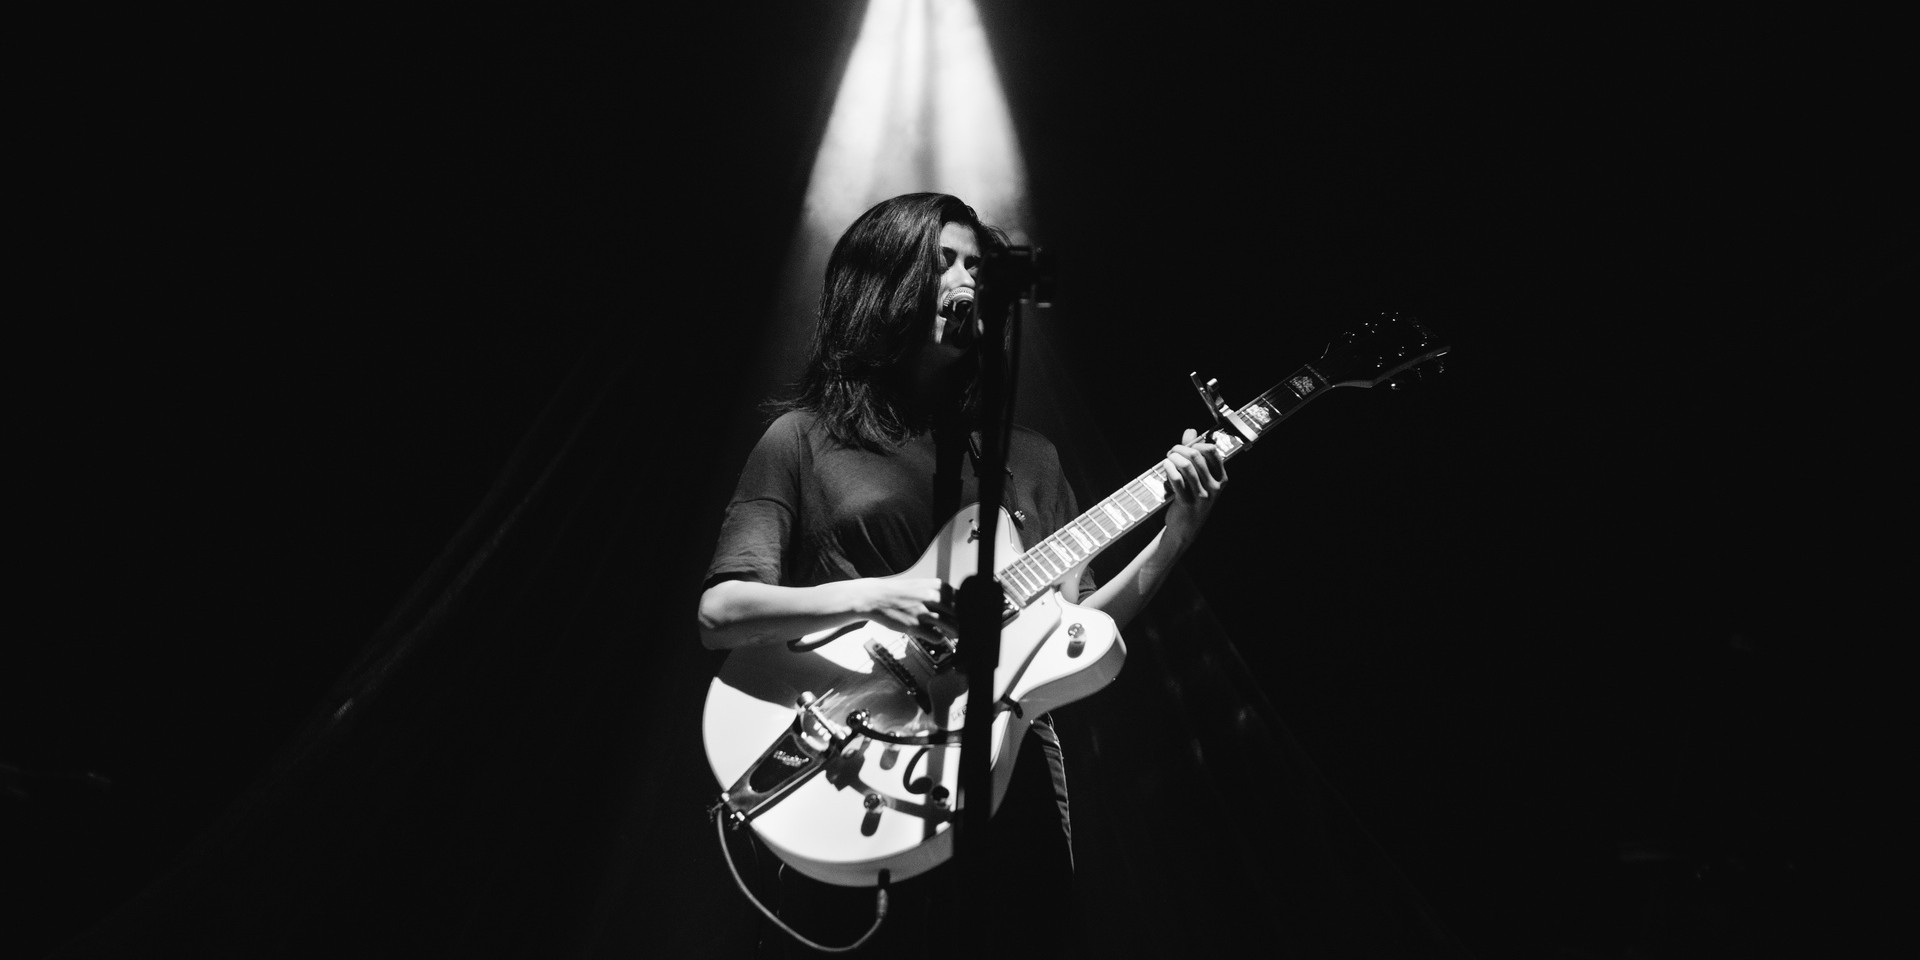 GIG REPORT: Daniela Andrade rides the waves of Manila for the last leg of her Shore Tour